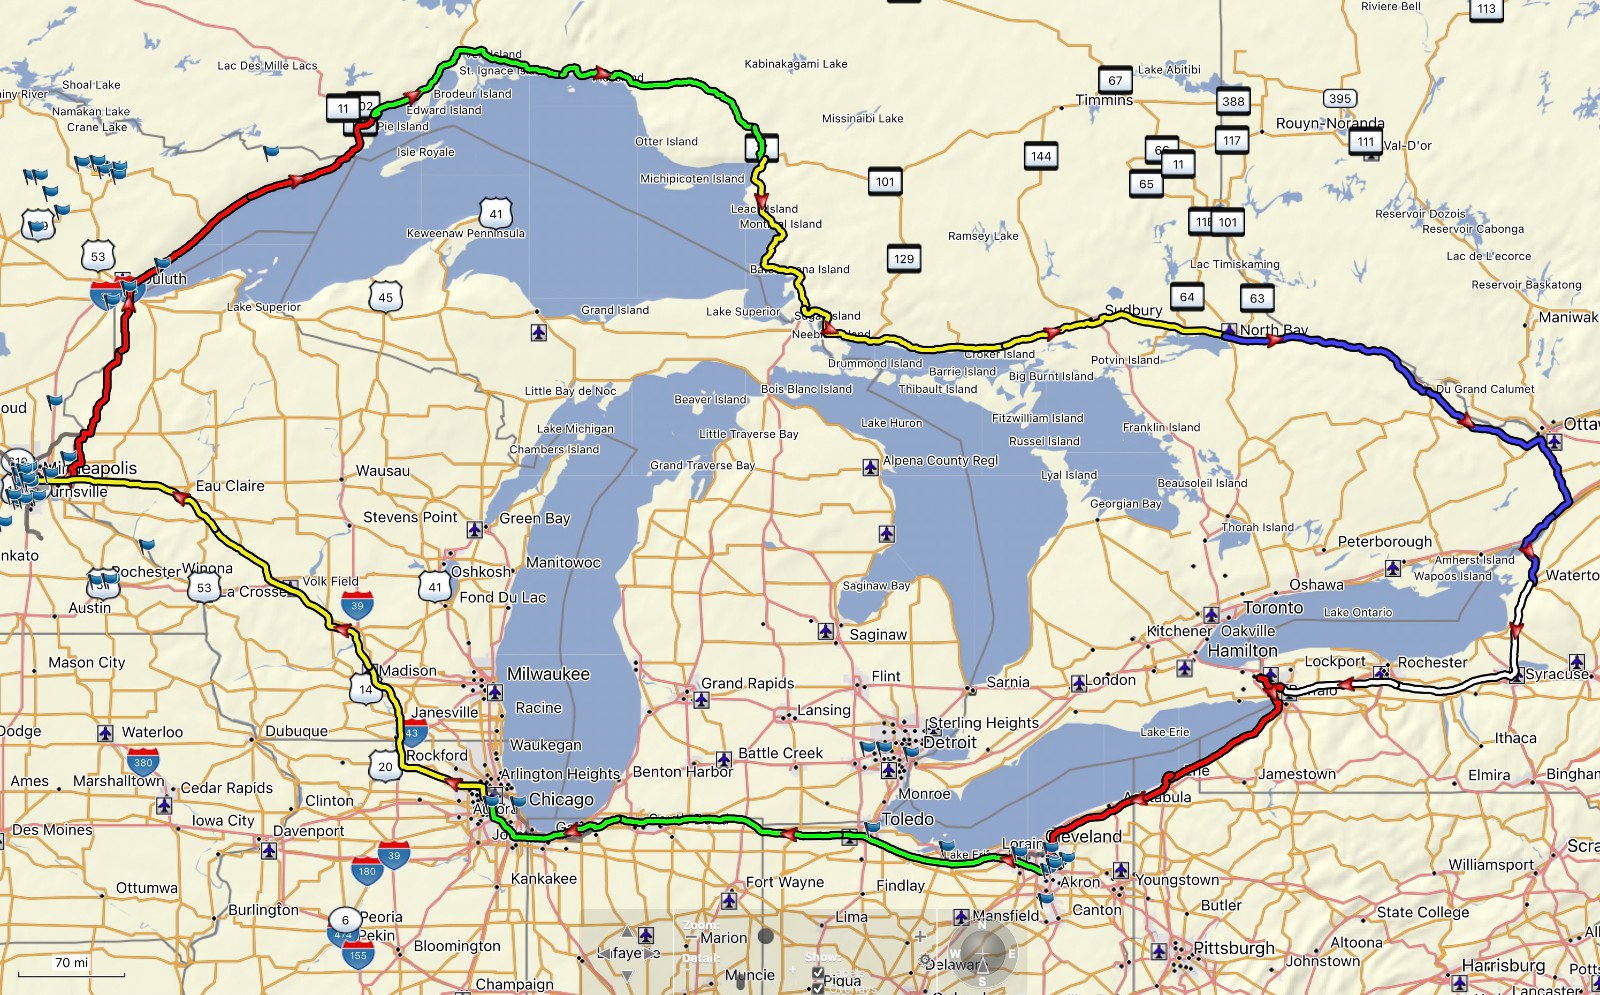 2023_Great_Lakes_Trip_Overview.jpg